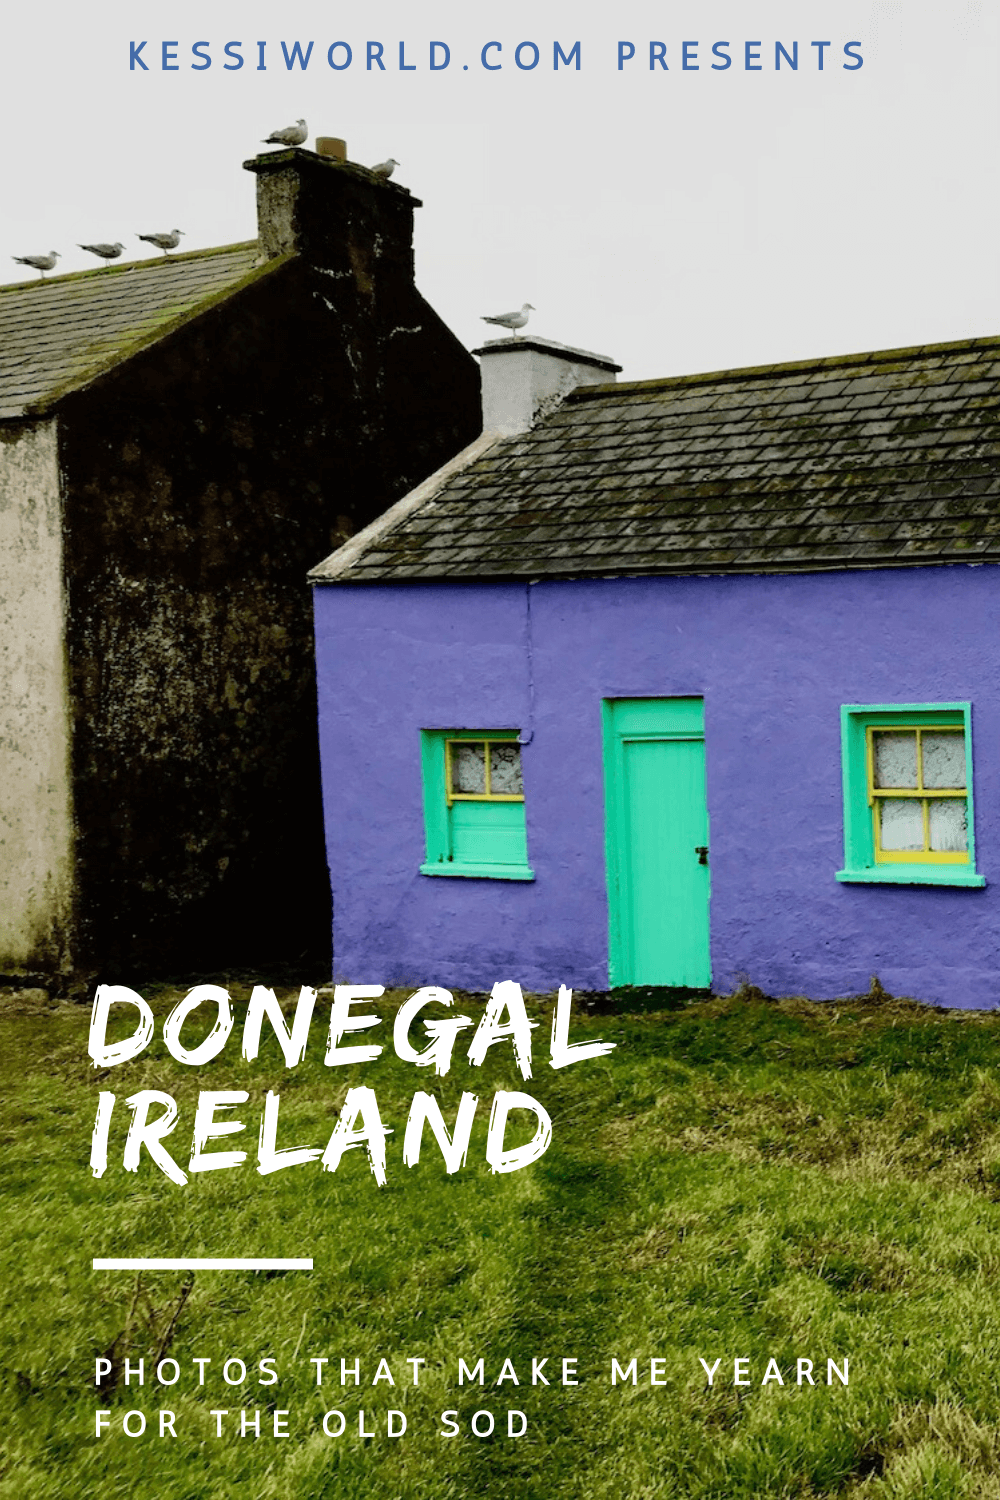 A traditional Irish home on Tory Island in County Donegal. The house is a vibrant purple with neon green trim and the three windows are framed with yellow color. The roof is slate with moss sporadically clinging to the surfaces and seagulls sit on top of the chimneys. The neighboring home is darker soot like black.